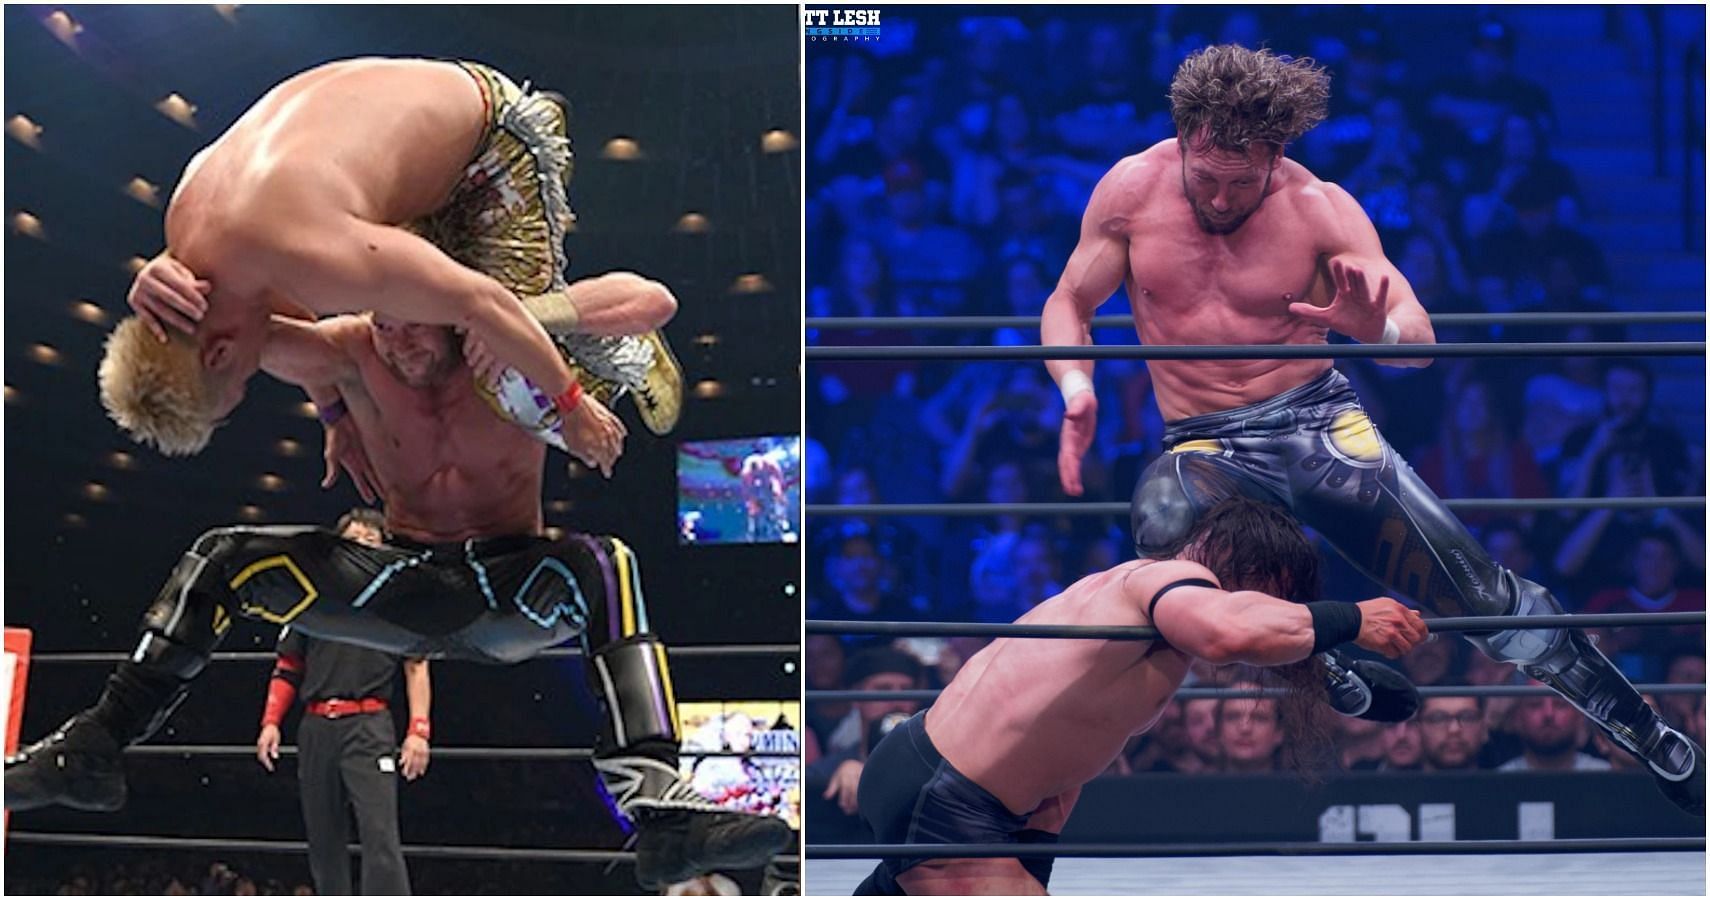 Kenny Omega delivering the One-Winged Angel